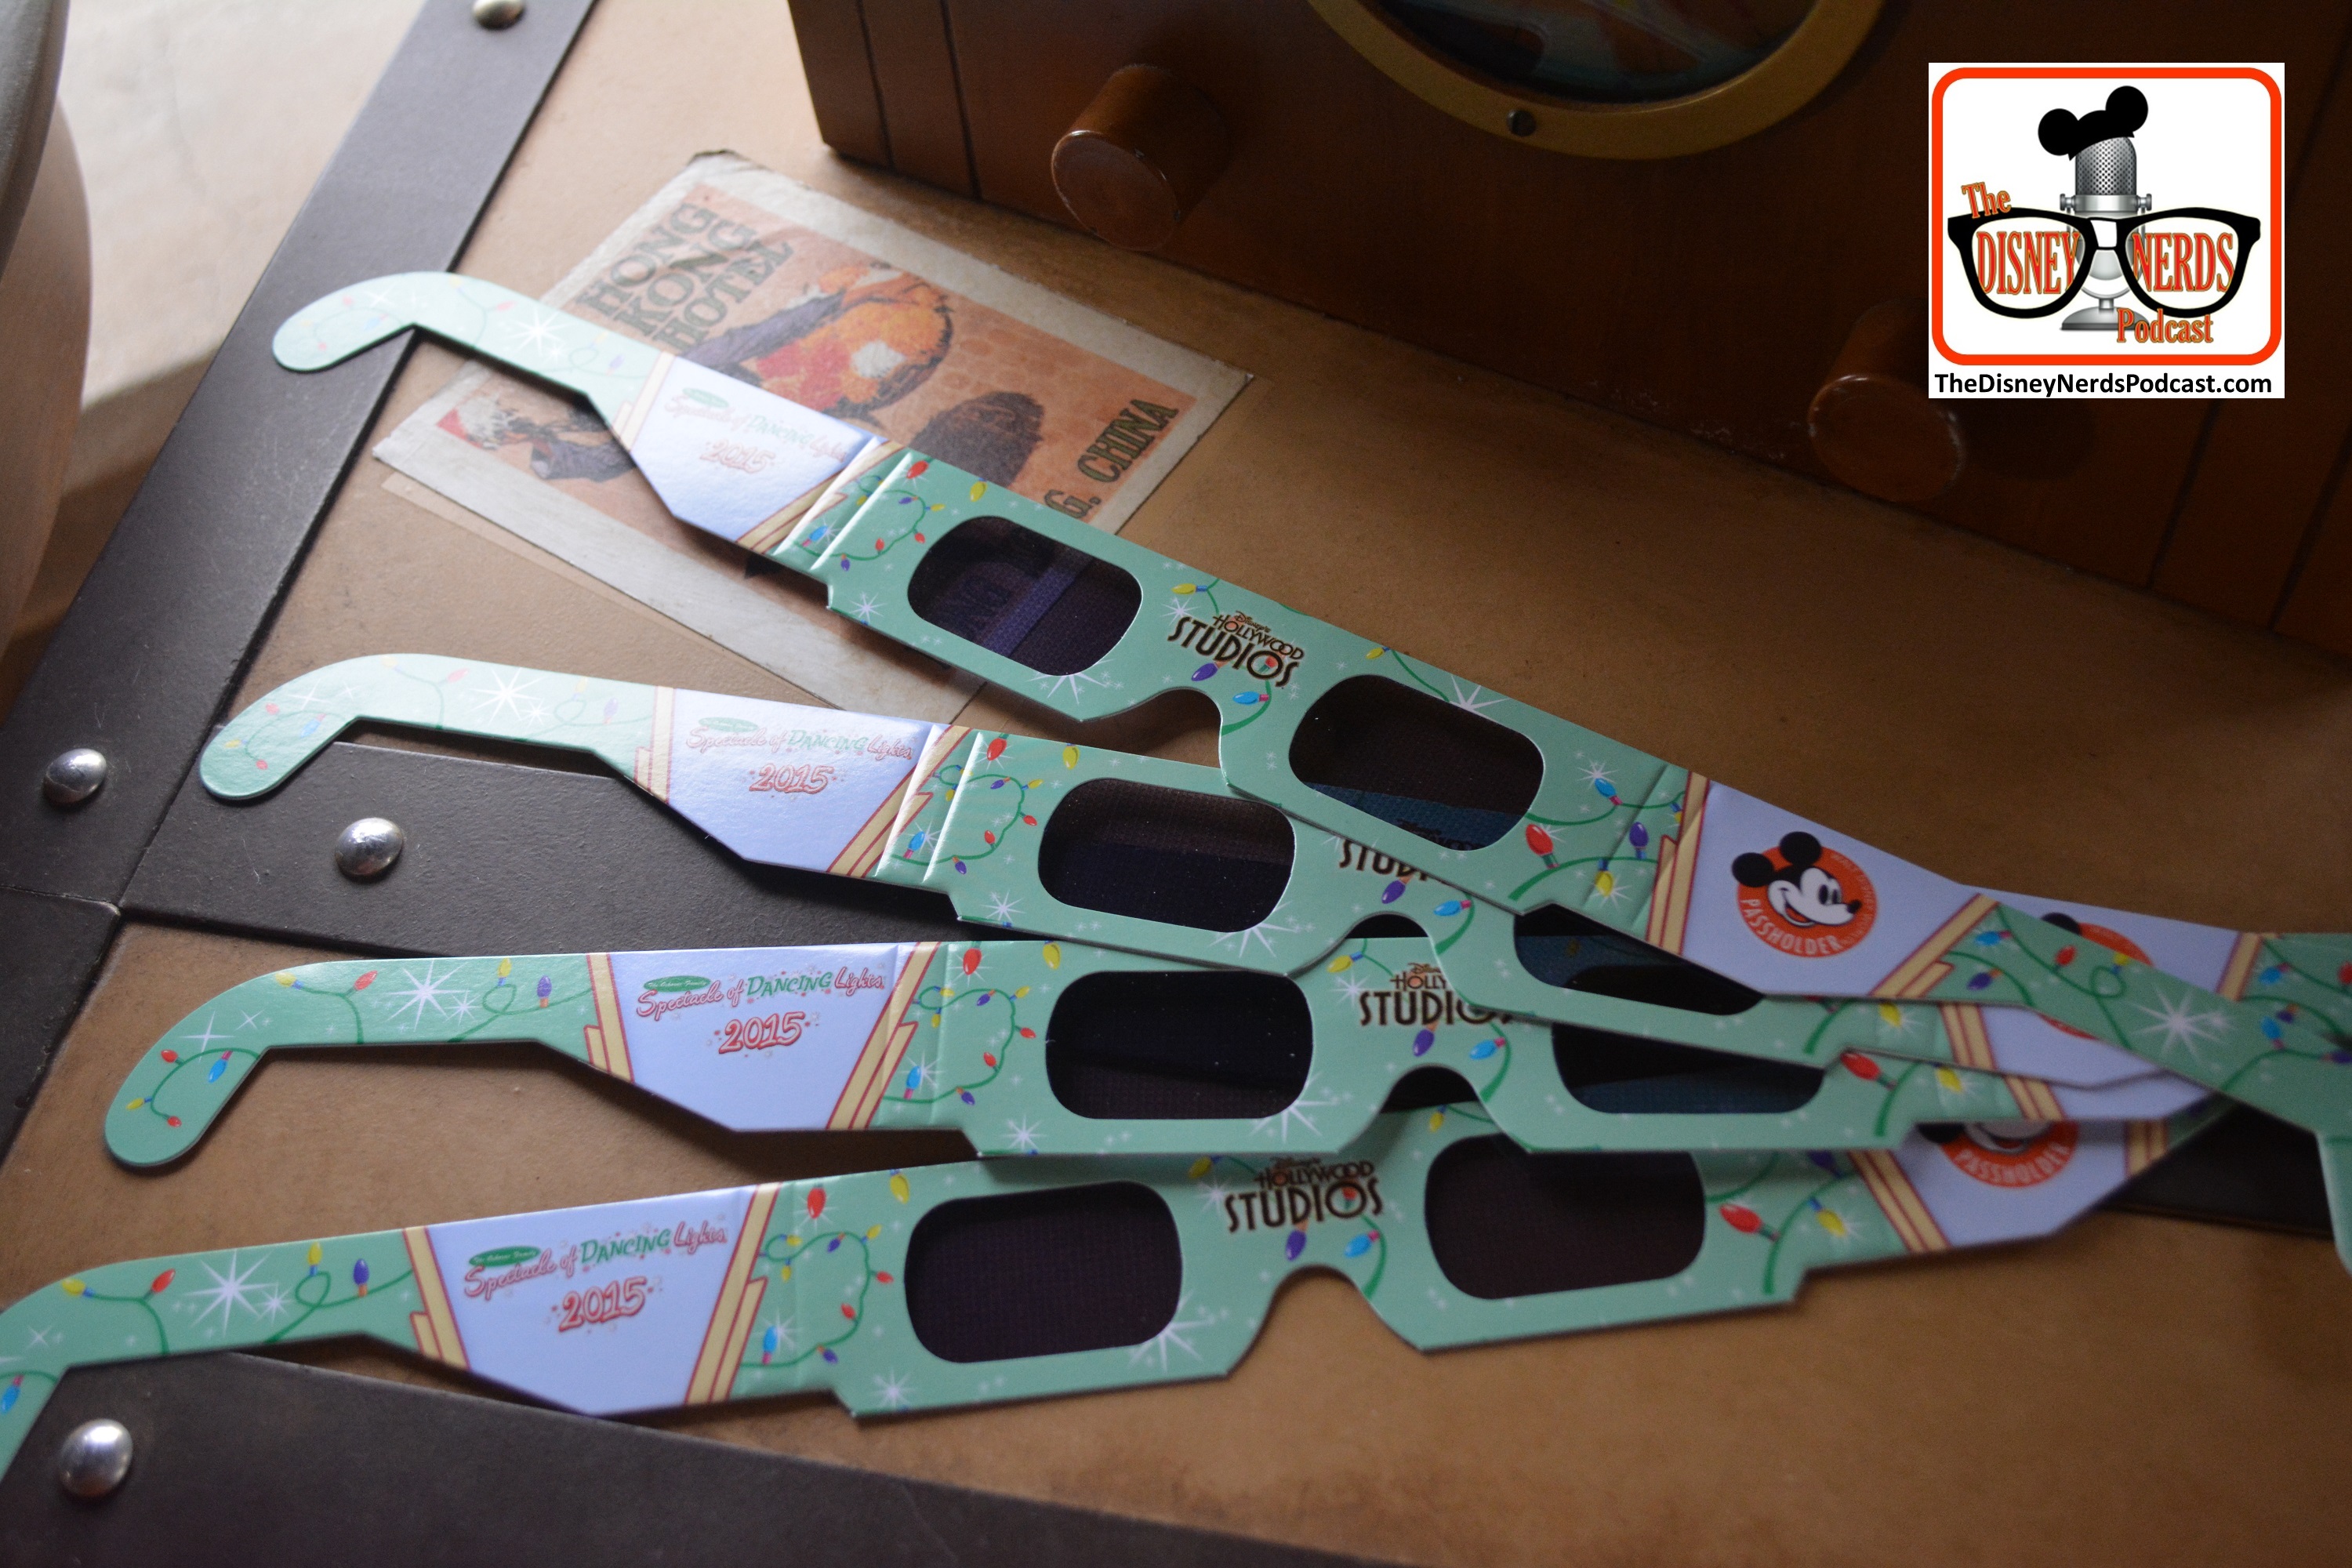 2015-12 - Hollywood Studios -Osborne Lights - get your Pass-holder 3D glasses at Sid Curingas